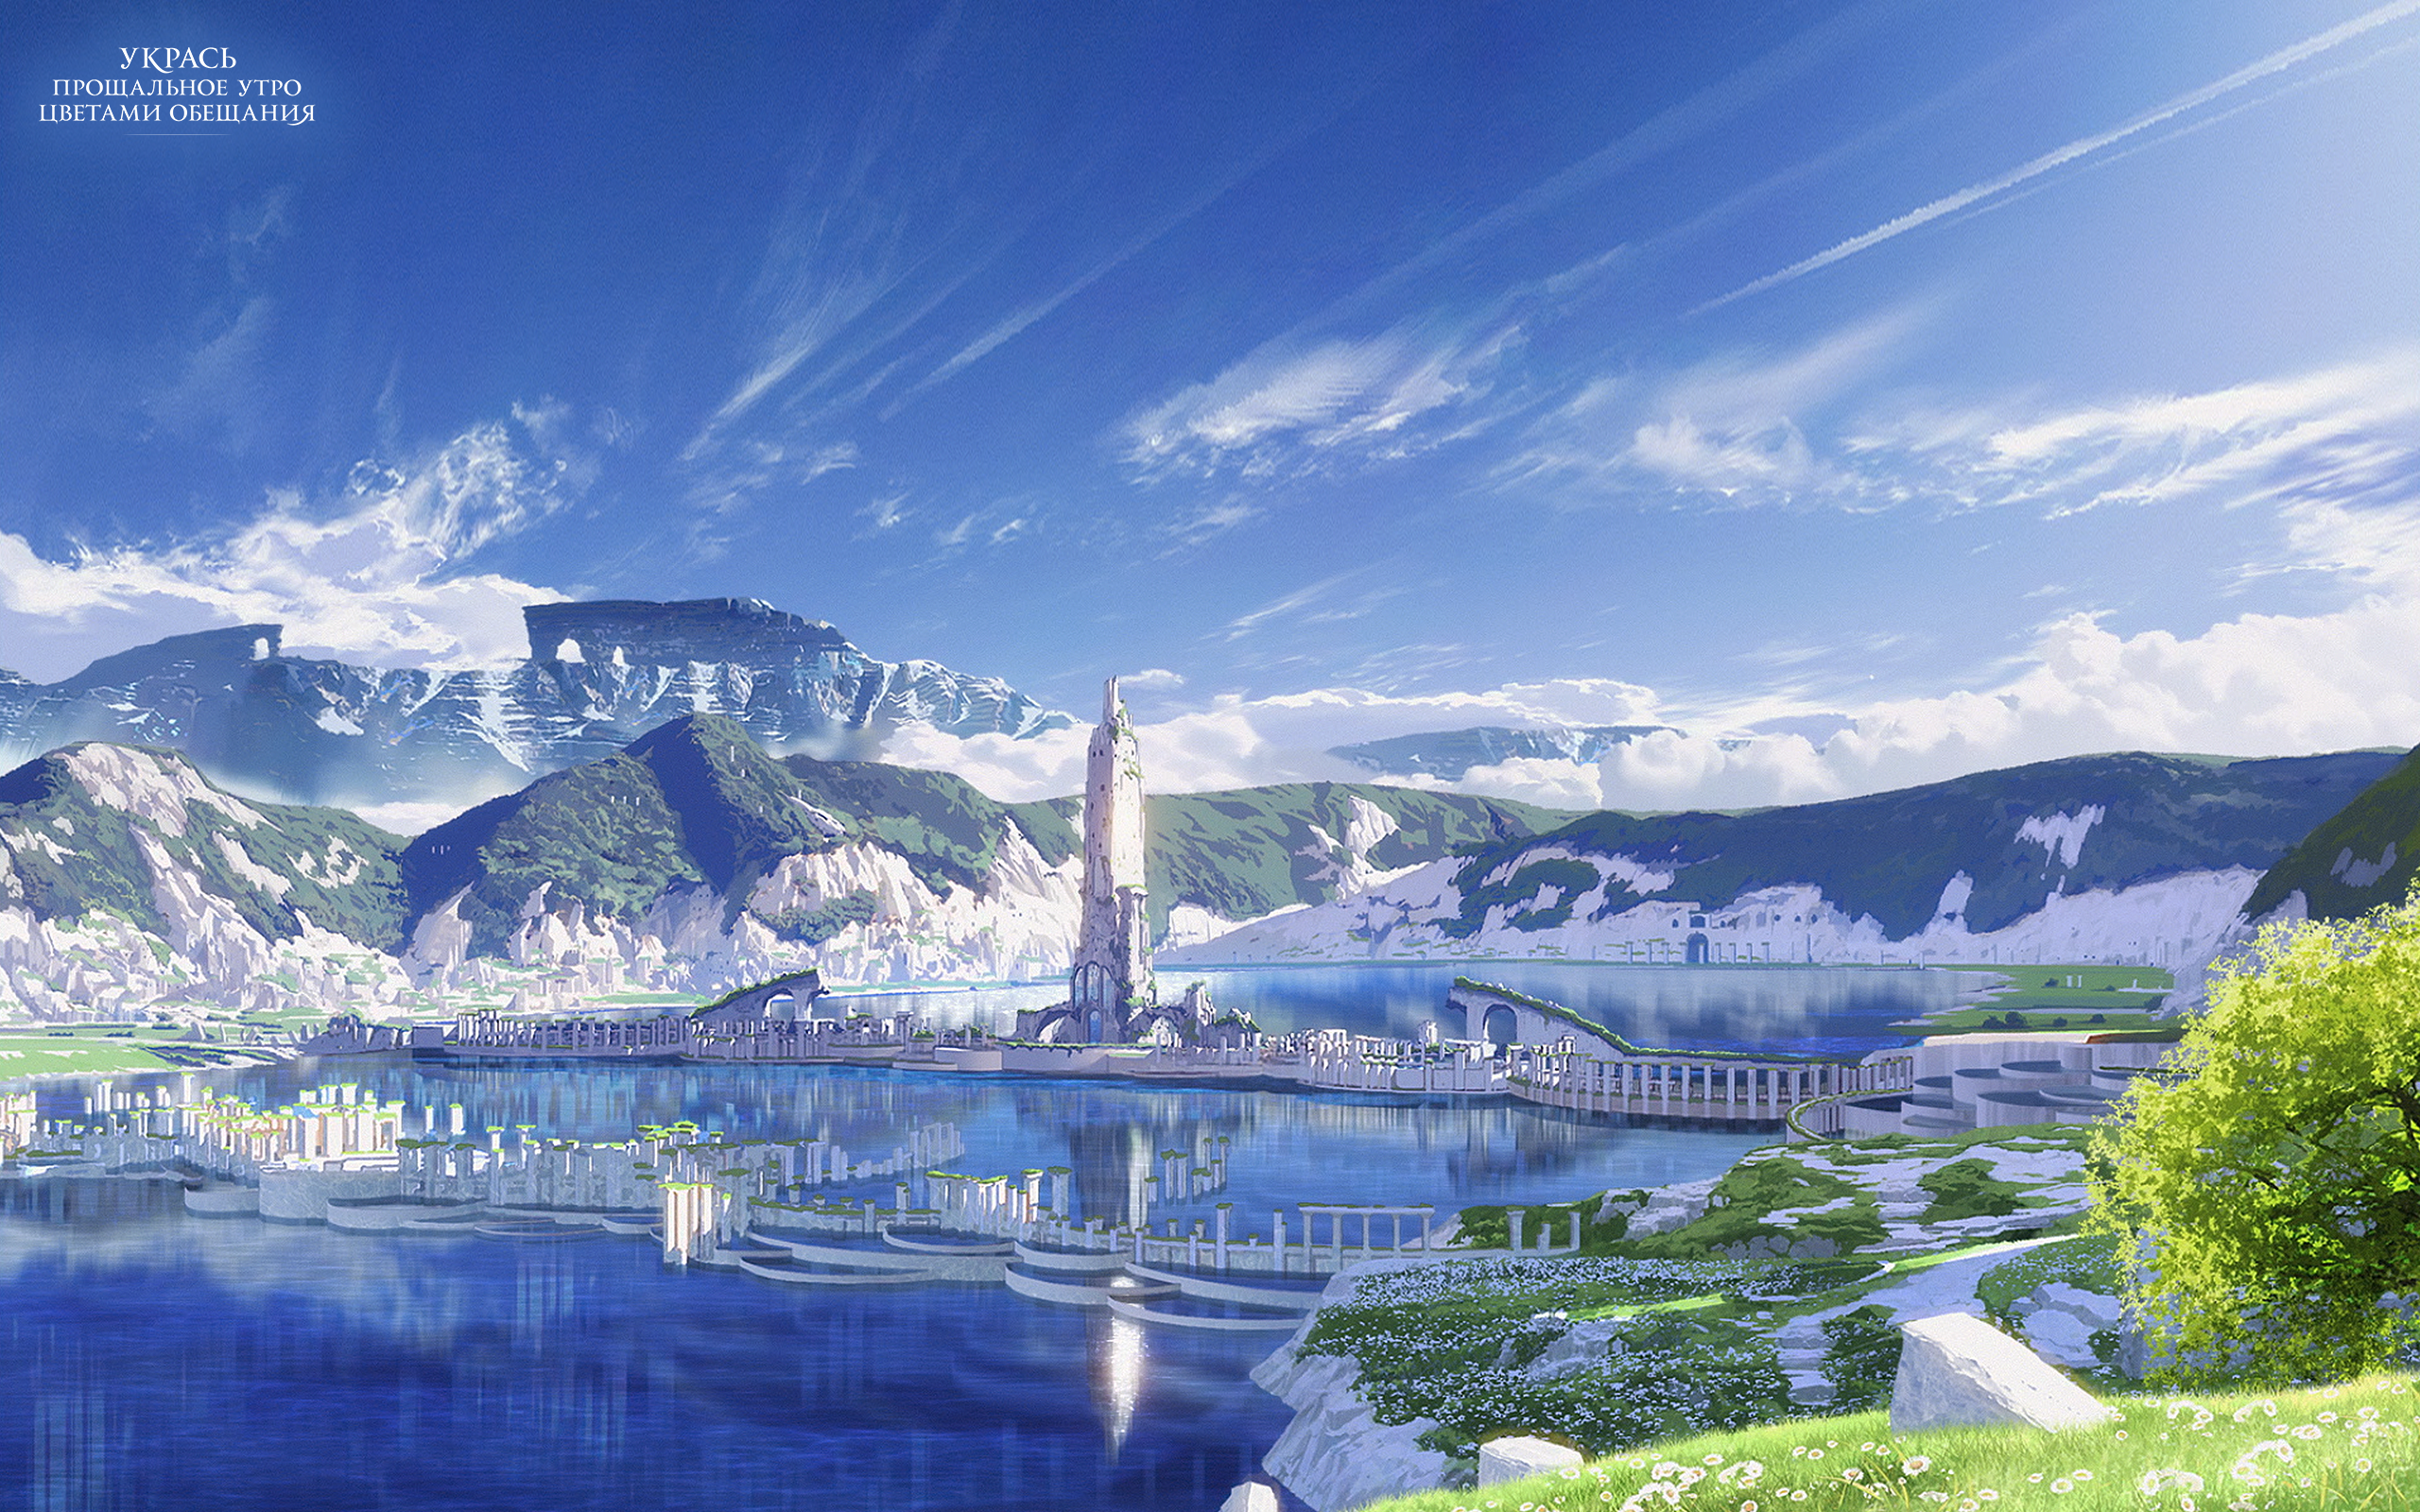 Maquia When The Promised Flower Blooms HD Wallpaper Background